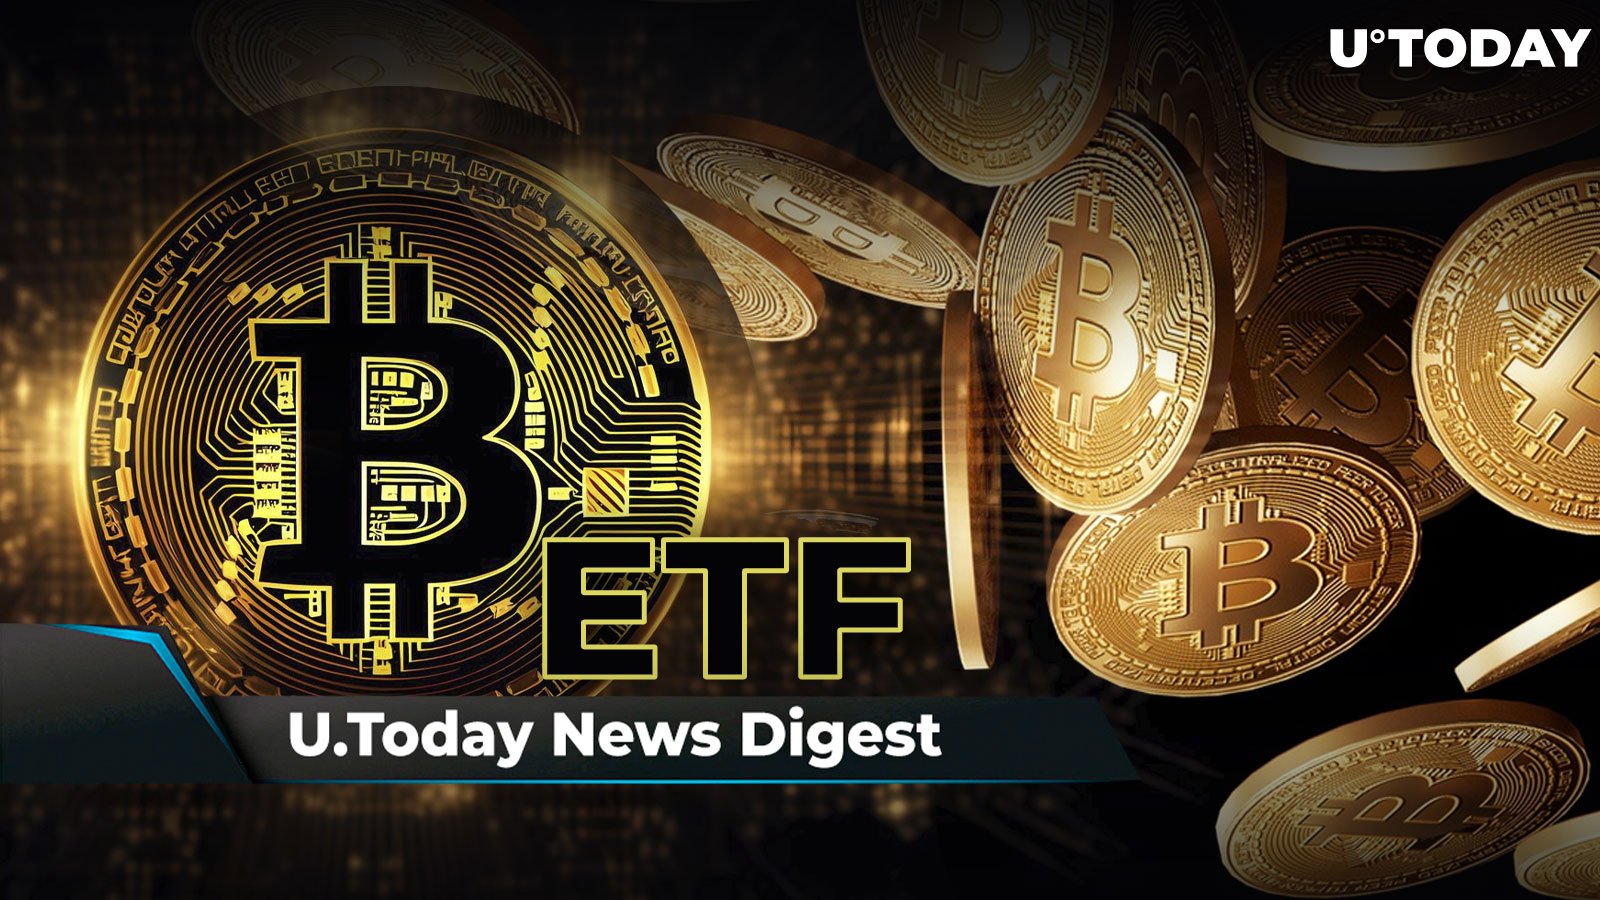 Vanguard Left Bitcoin ETF Inflows in the Dust, Nearly $1 Billion in BTC Vanishes After Transfer From Coinbase, Binance to Delist Six BTC, ETH and BNB Trading Pairs: Crypto News Digest by U.Today